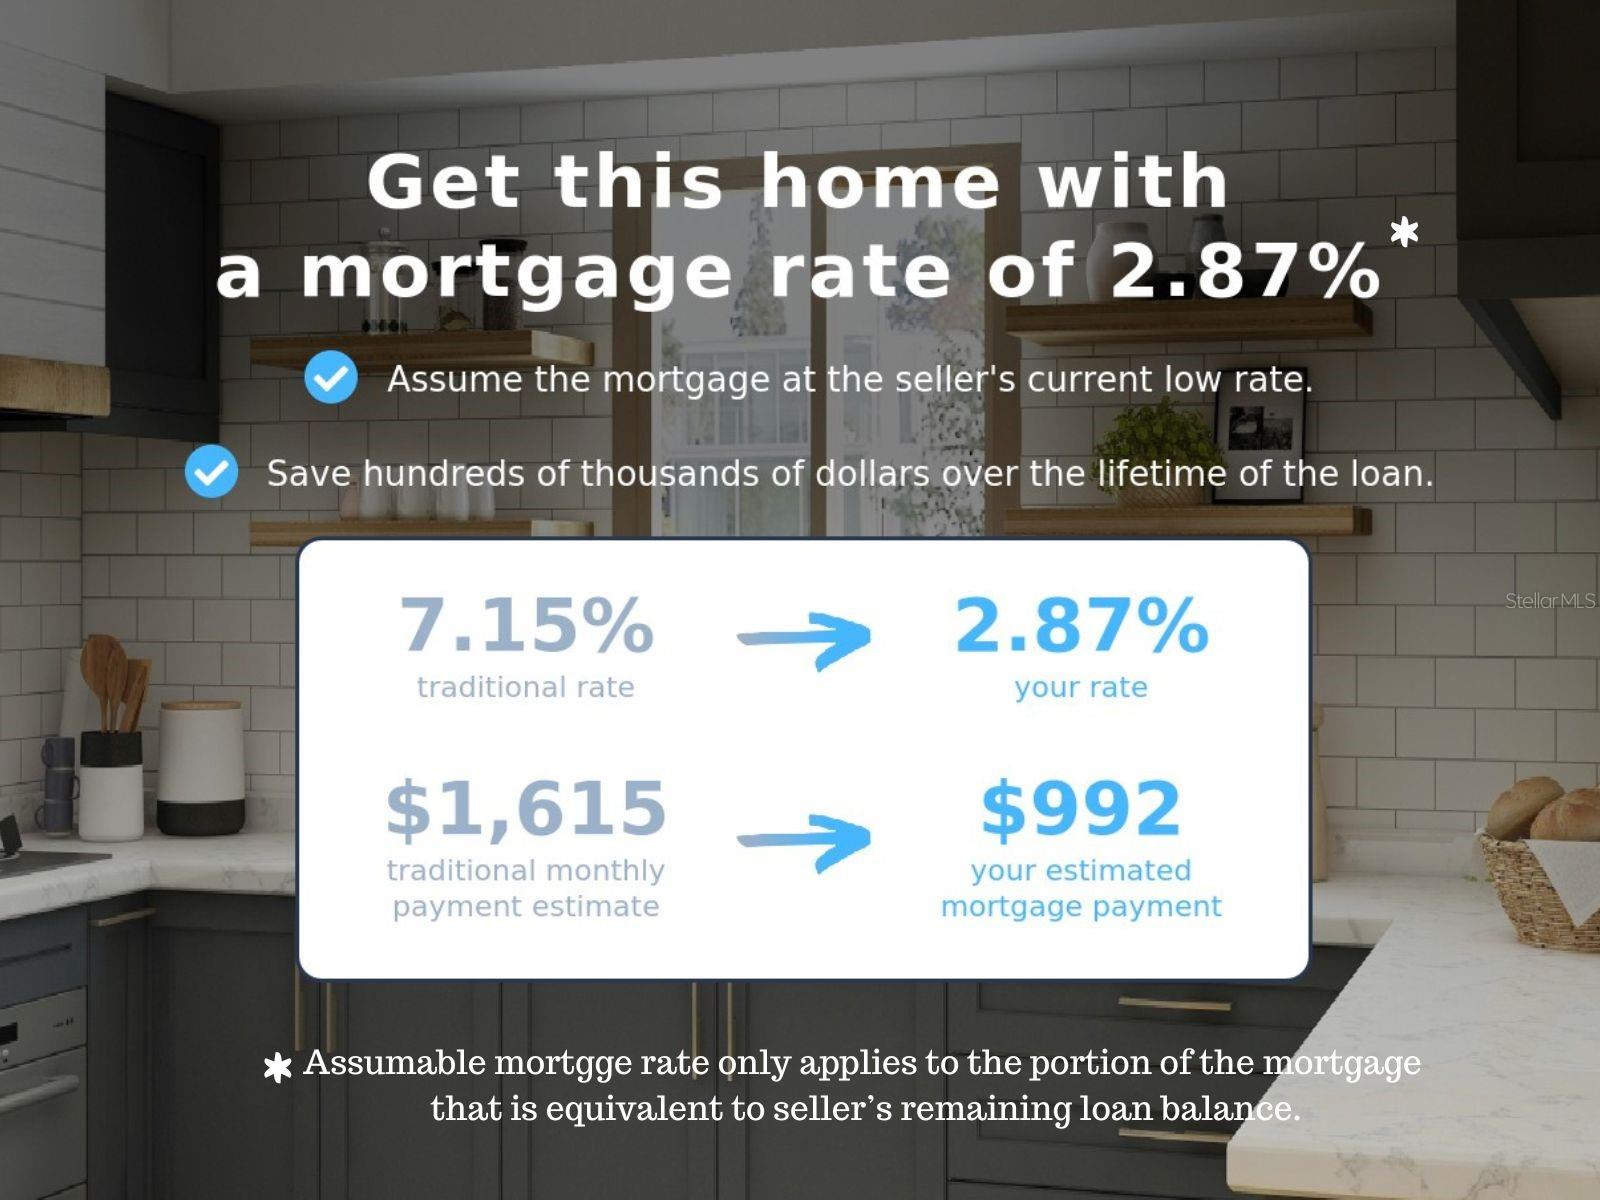 Ask about Assumable mortgage.